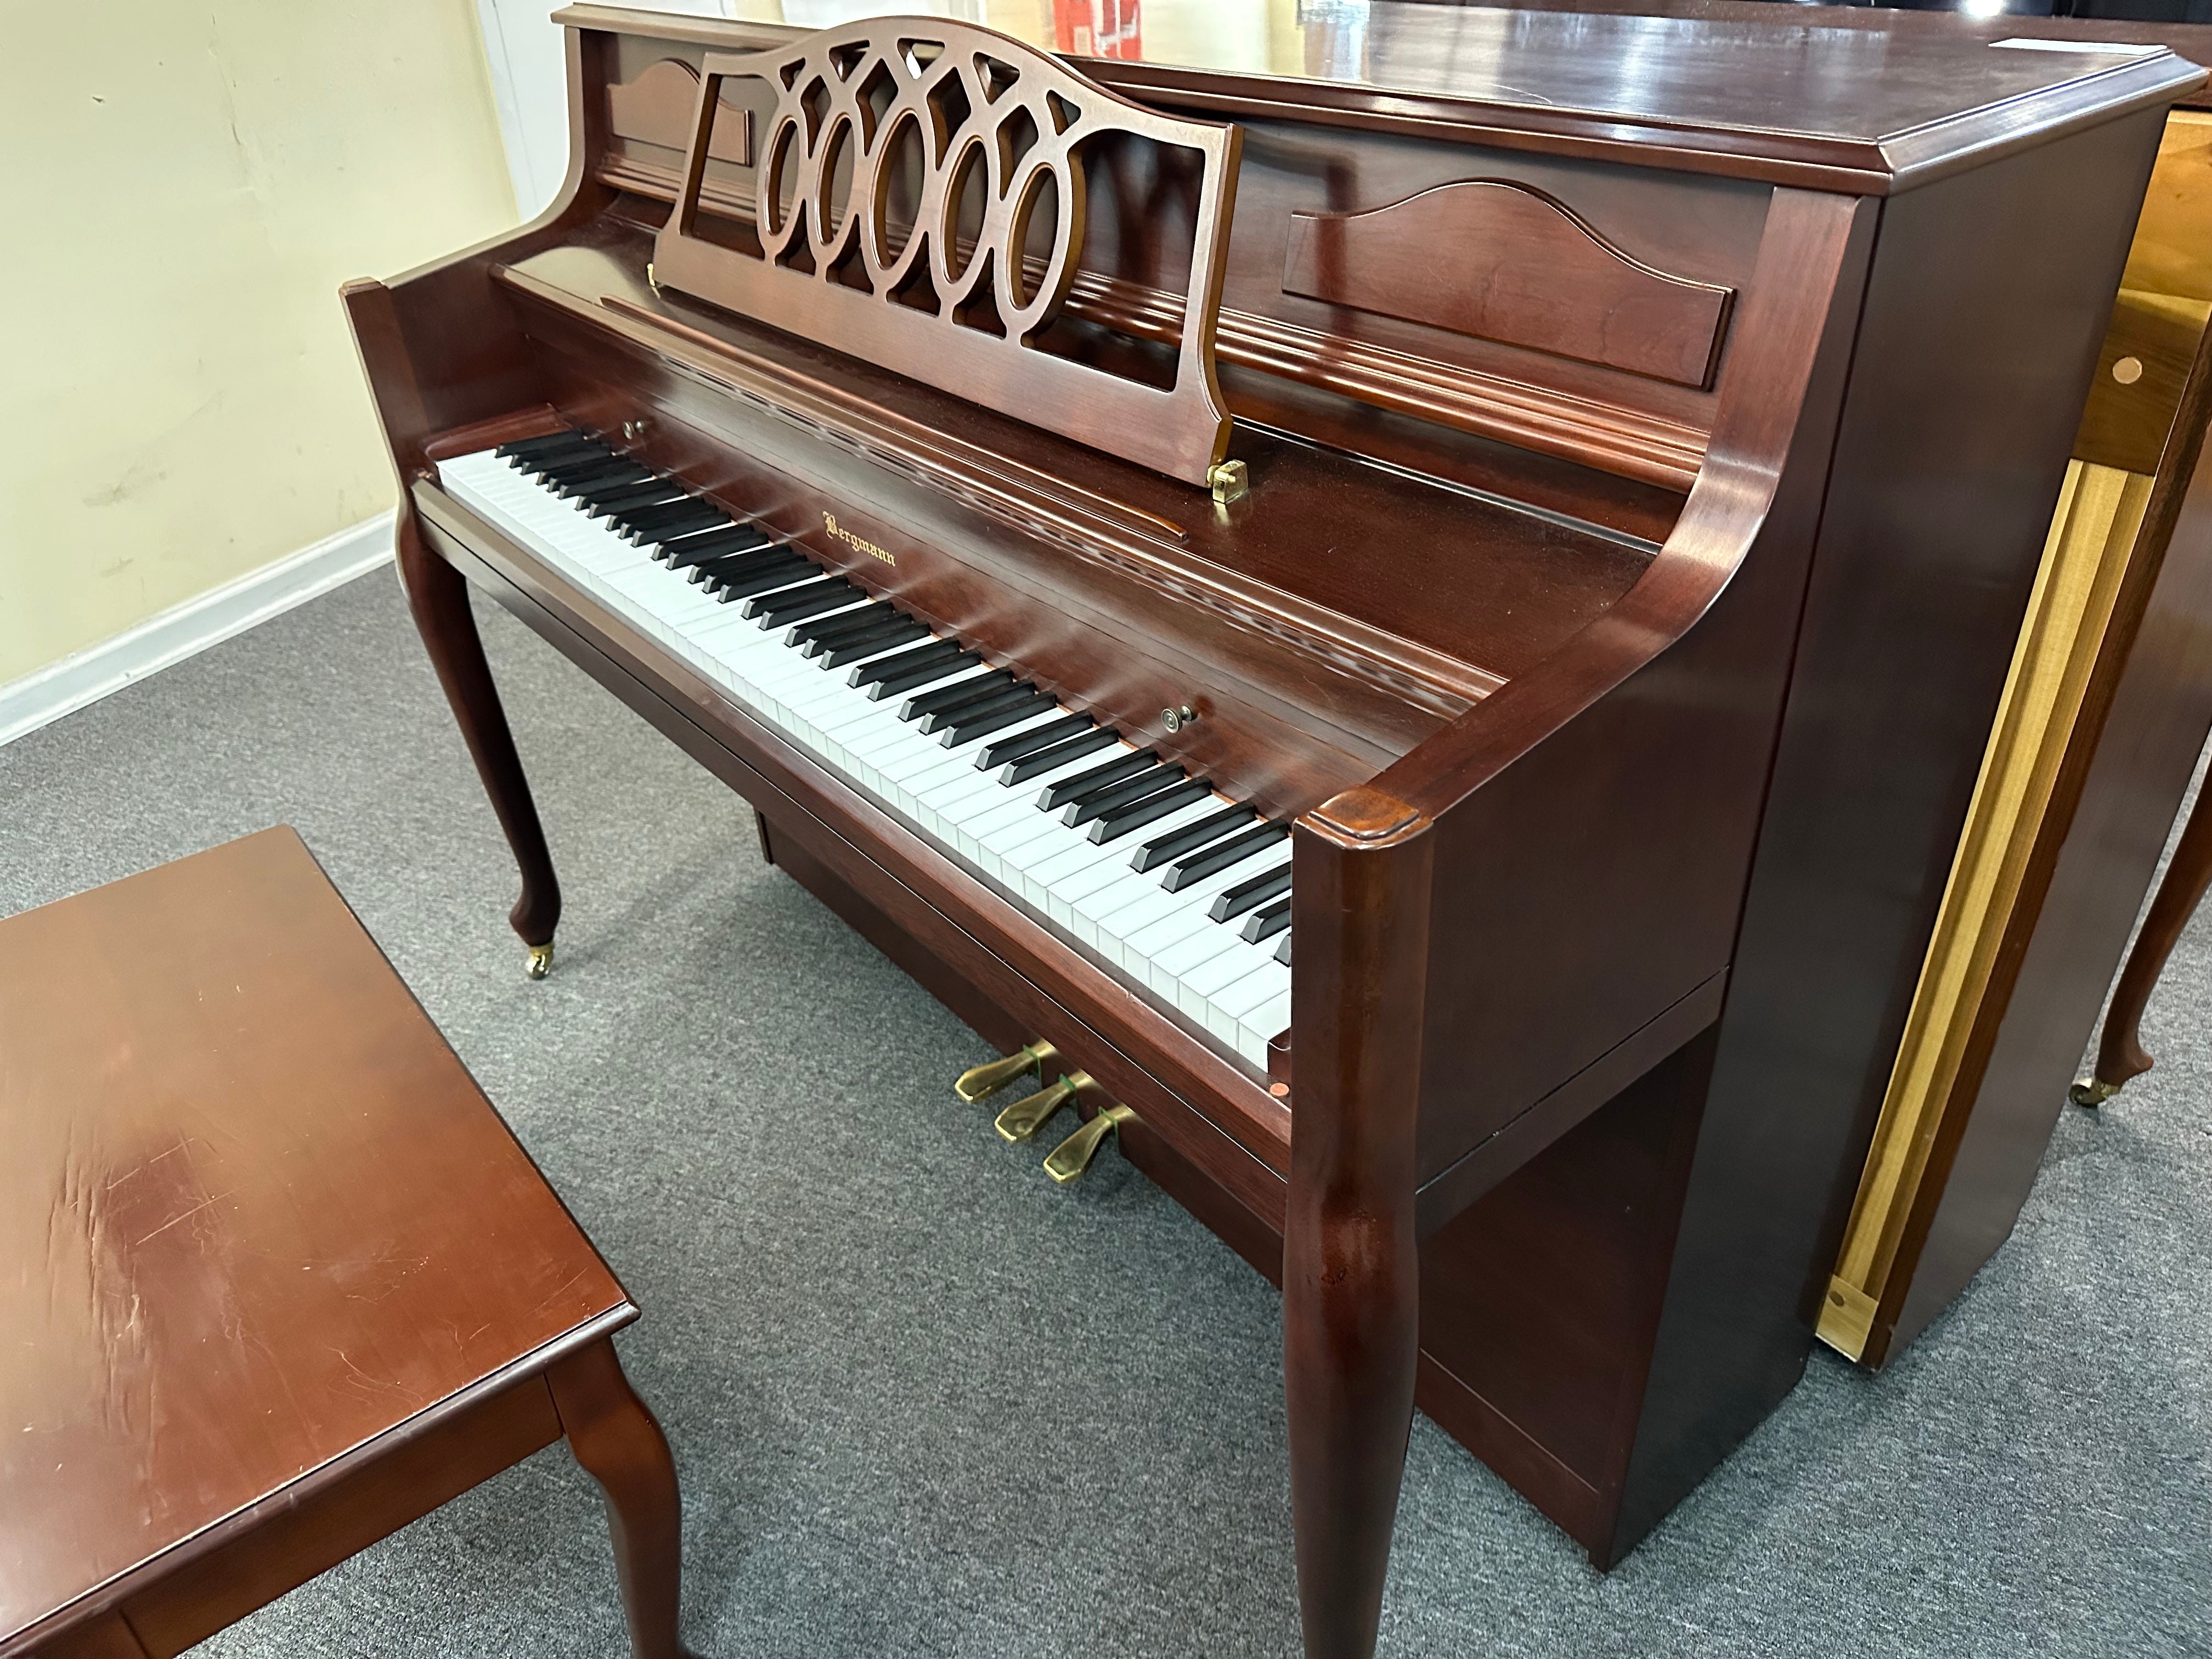 Bergmann Console Piano in Cherry French Provincial Finish